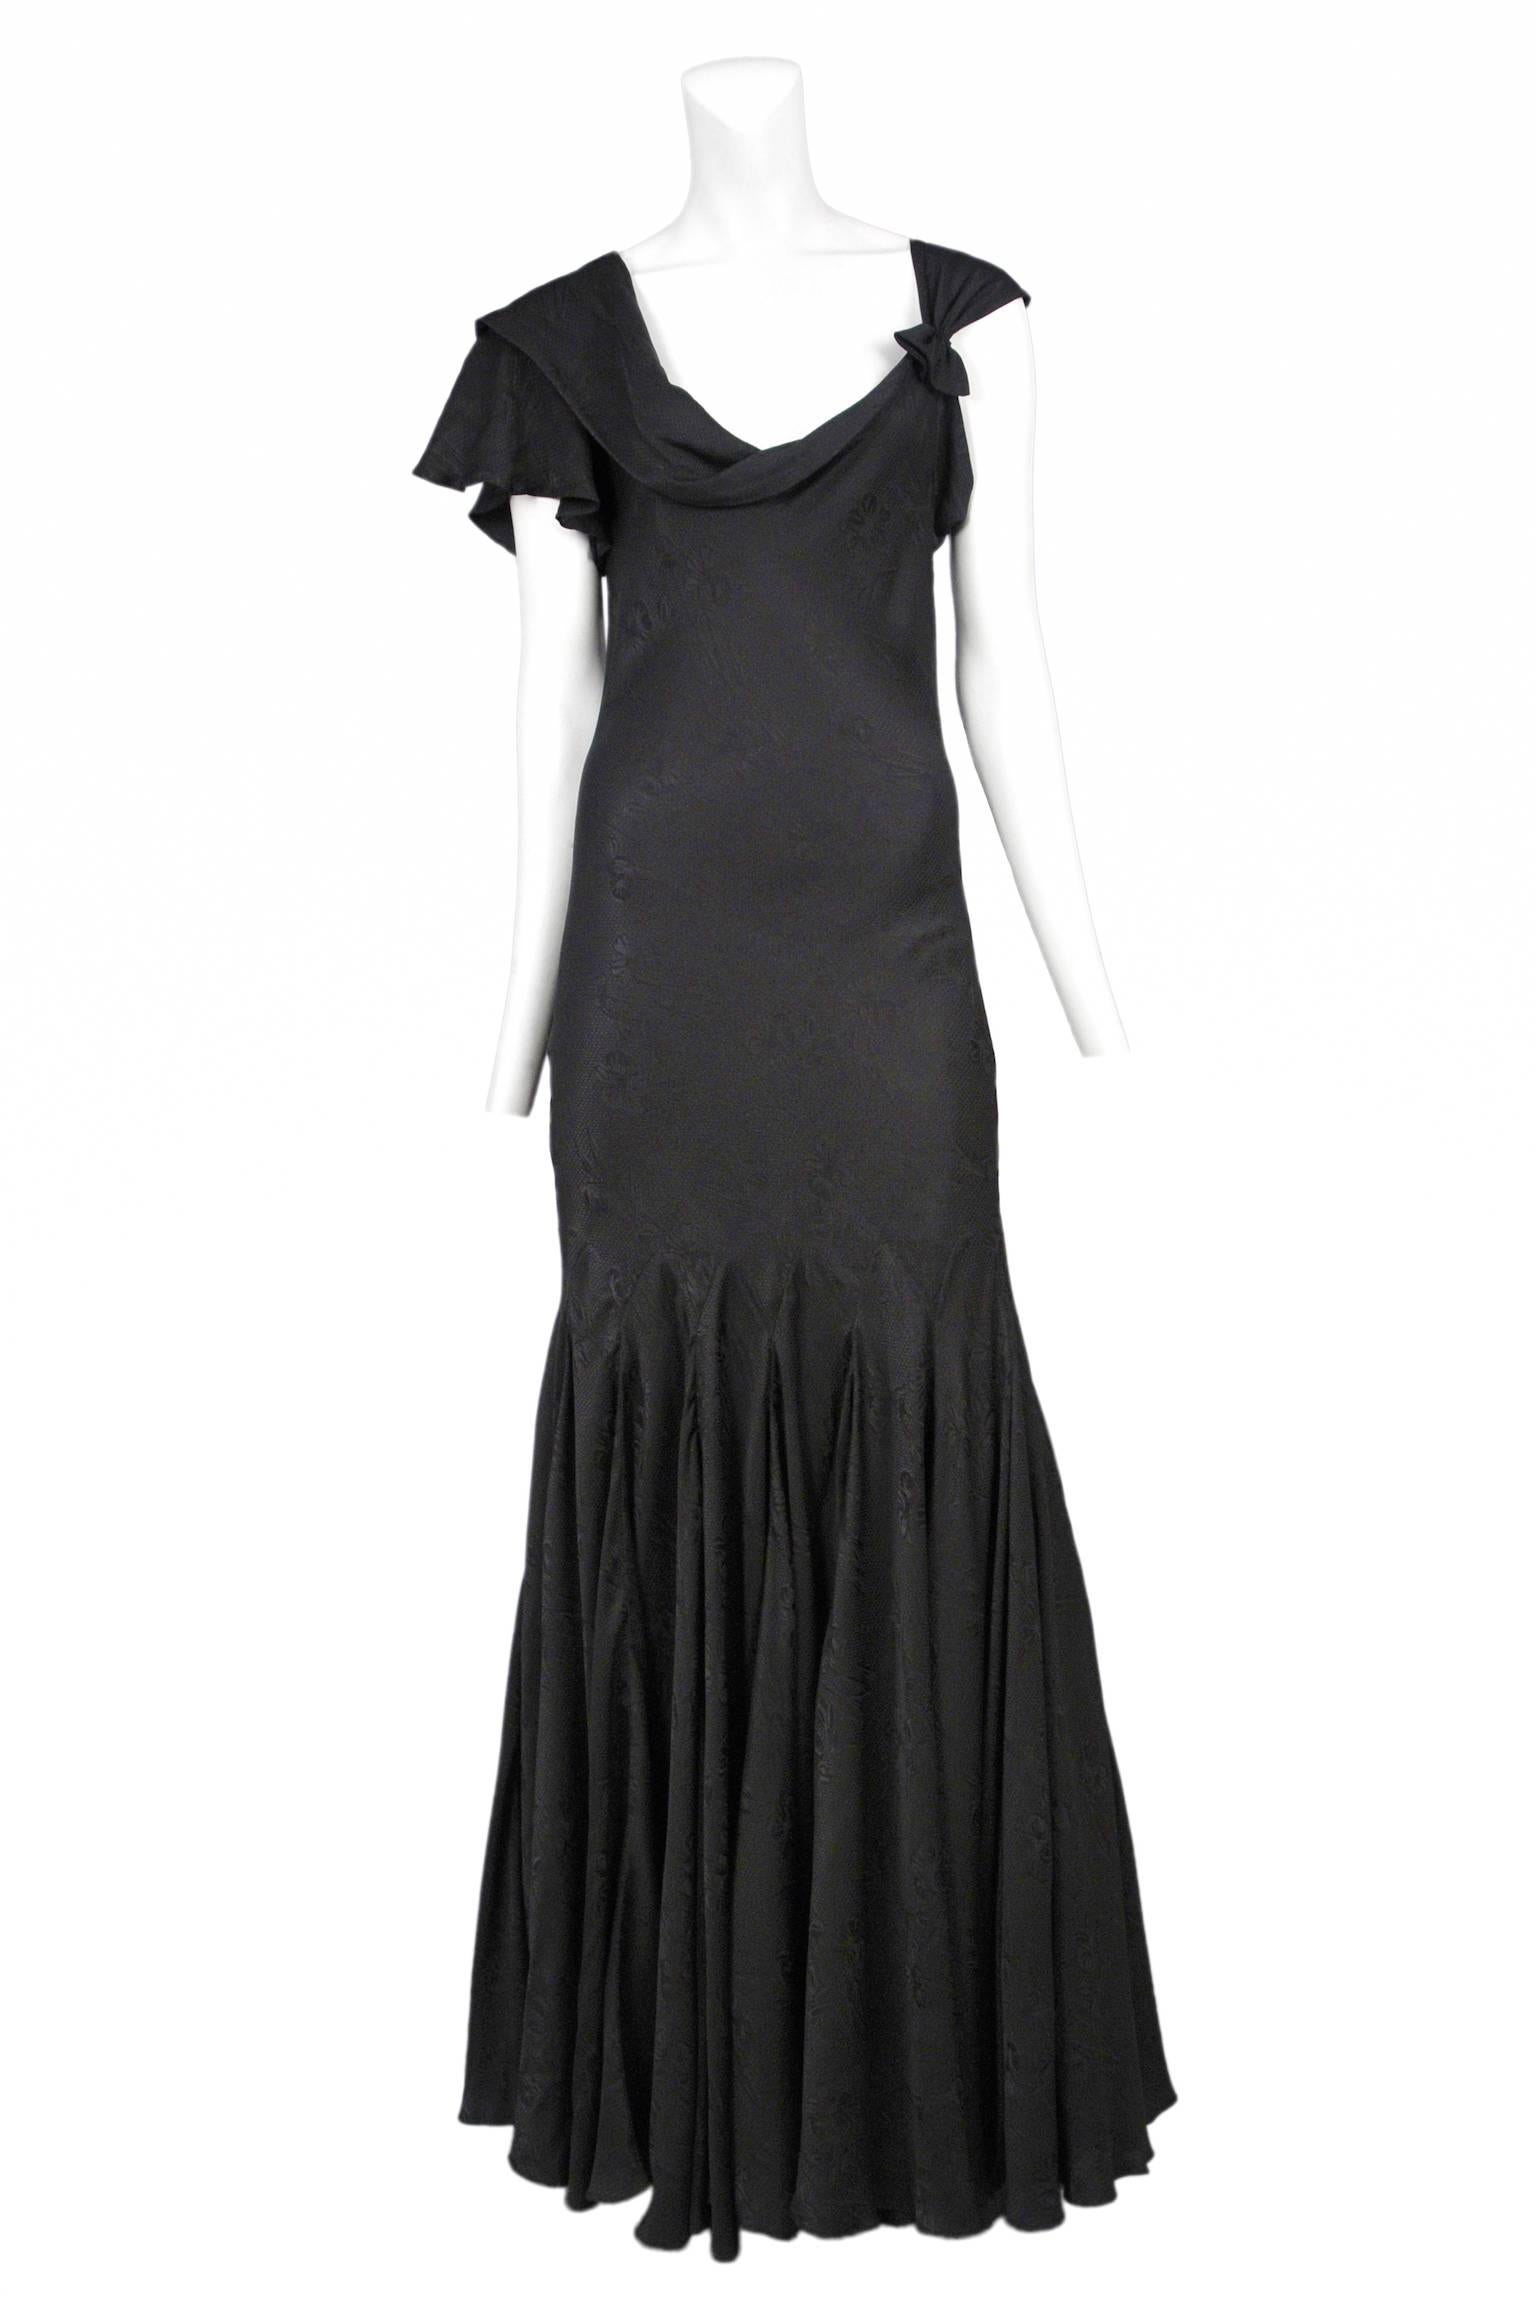 Vintage Alexander McQueen black silk gown with asymmetrical neckline, flutter sleeve, godet pleats at skirt and tonal floral pattern throughout. From the Sarabande Spring / Summer 2007 Collection.